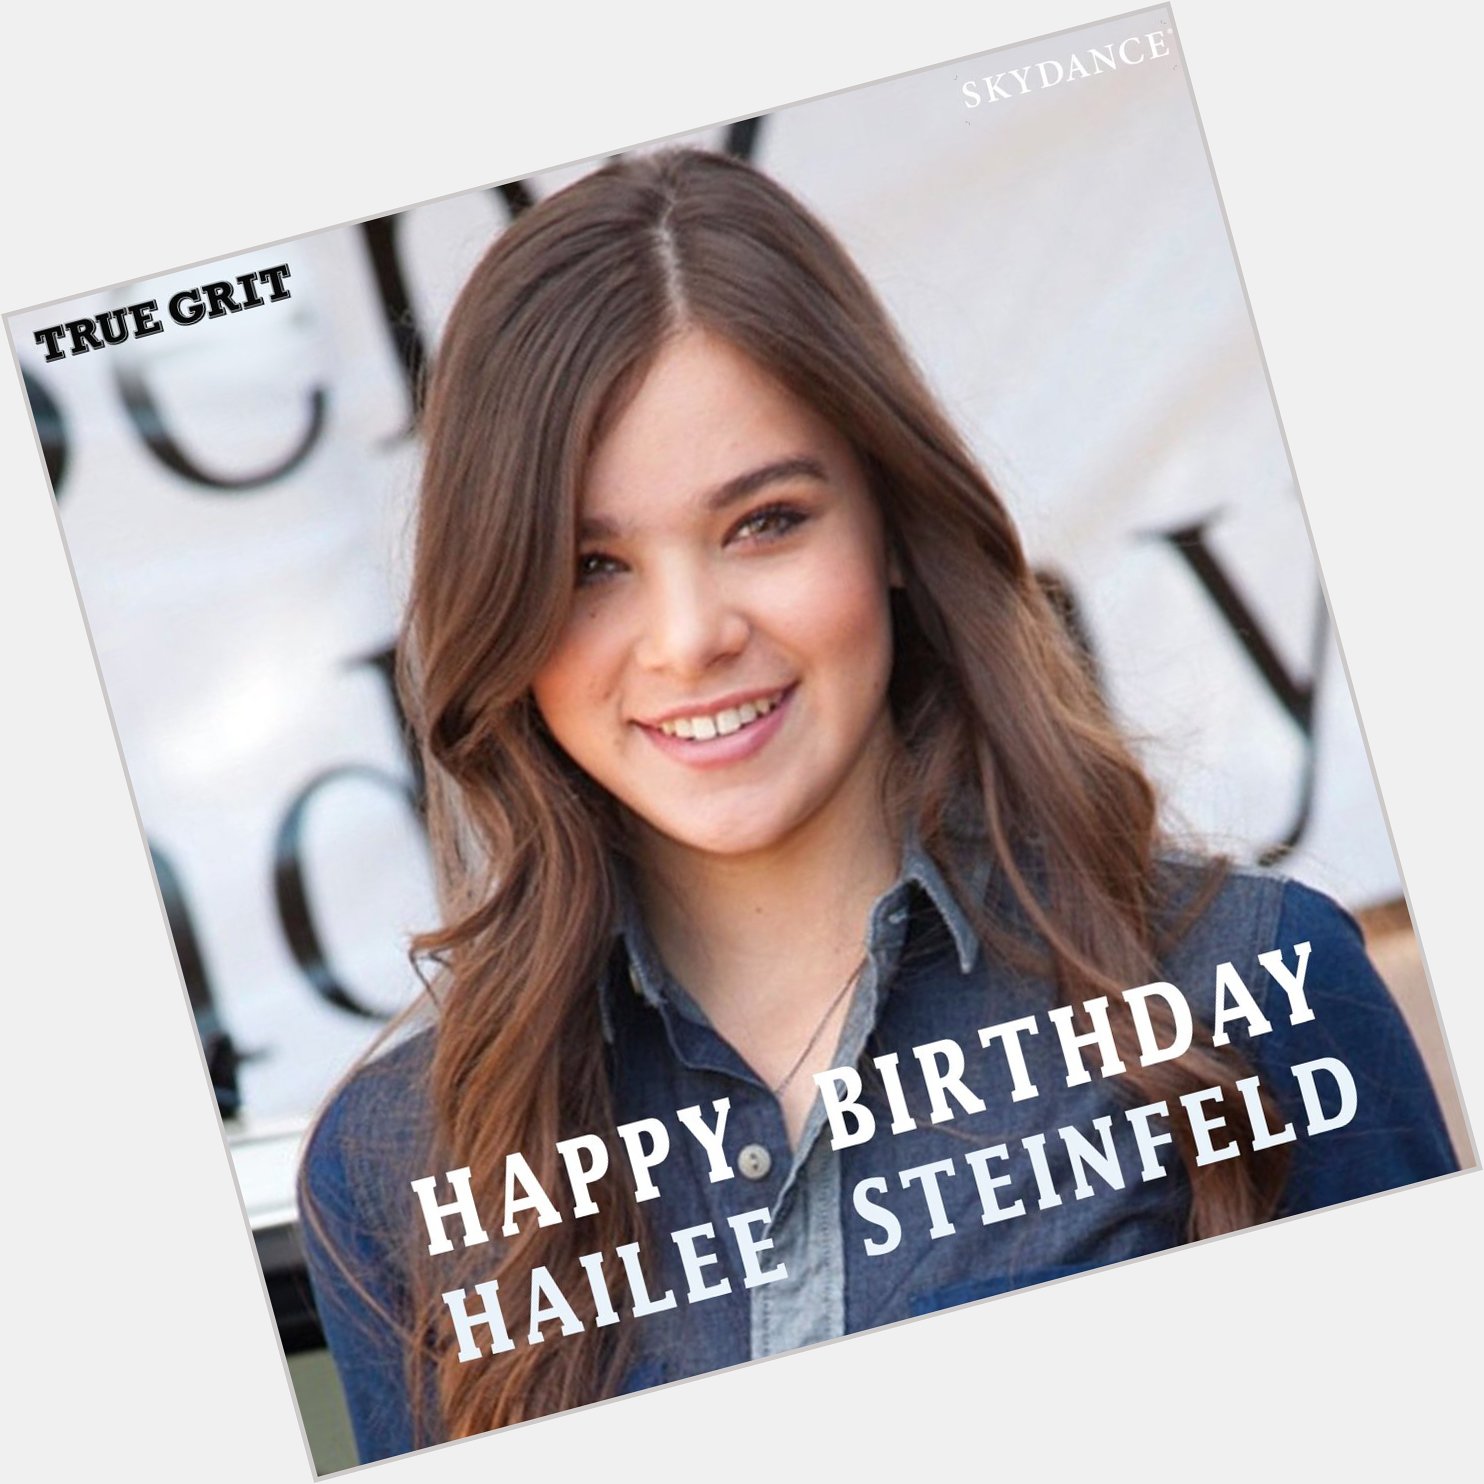 Happy birthday to the amazing and mega-talented Hailee Steinfeld! 